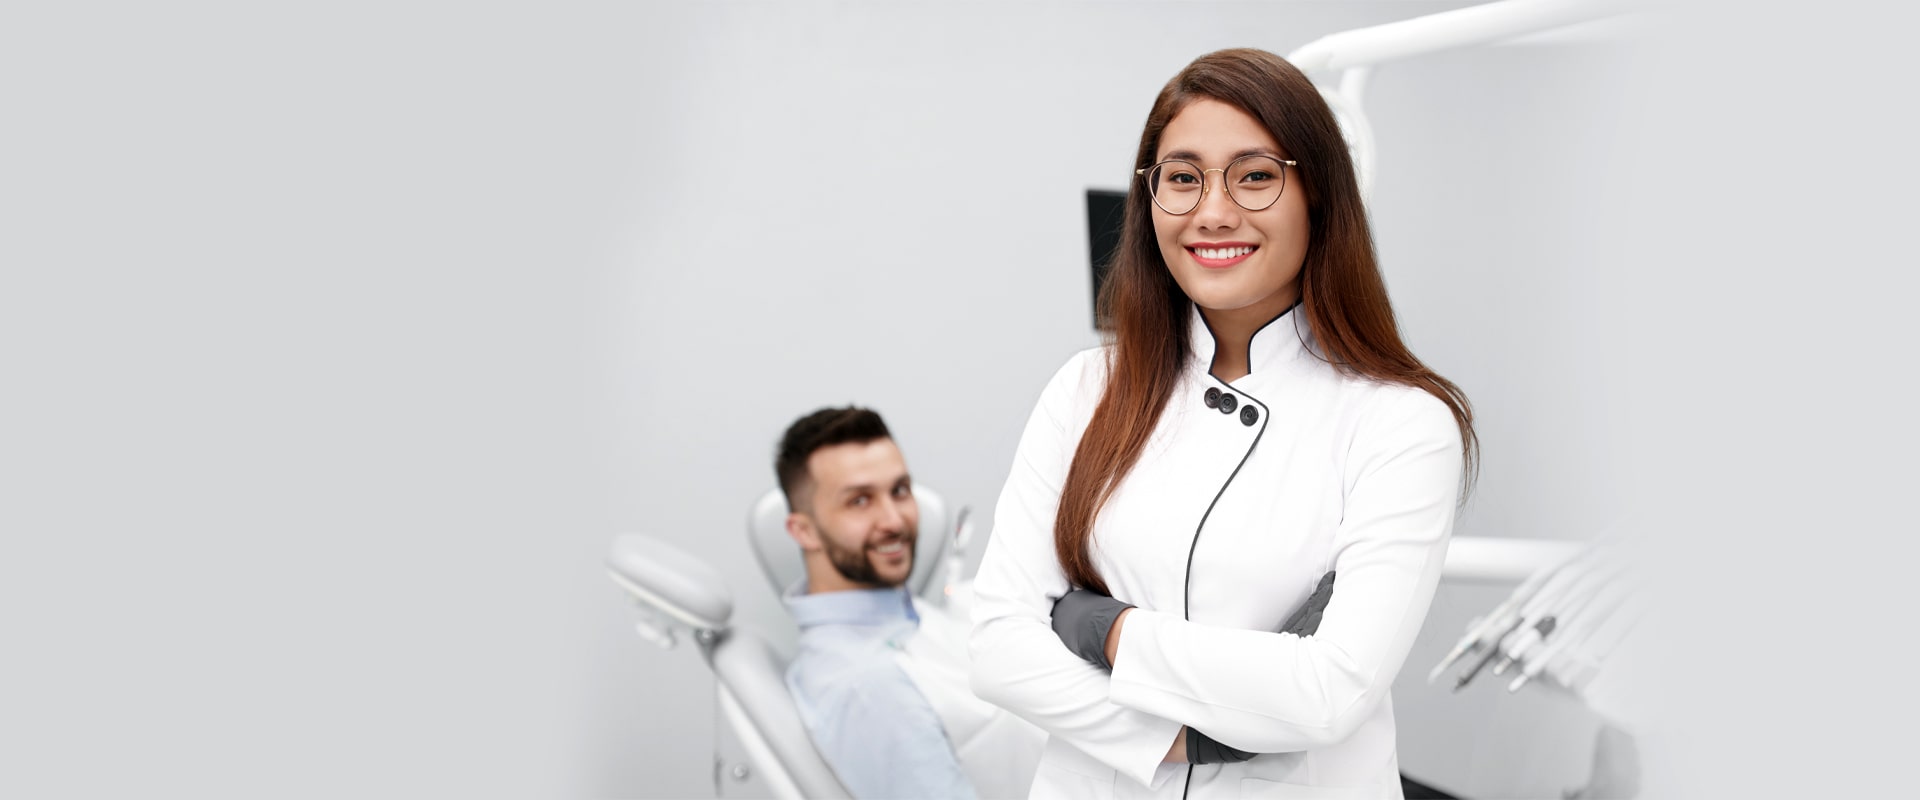 A happy picture of dentist with patient at dental office